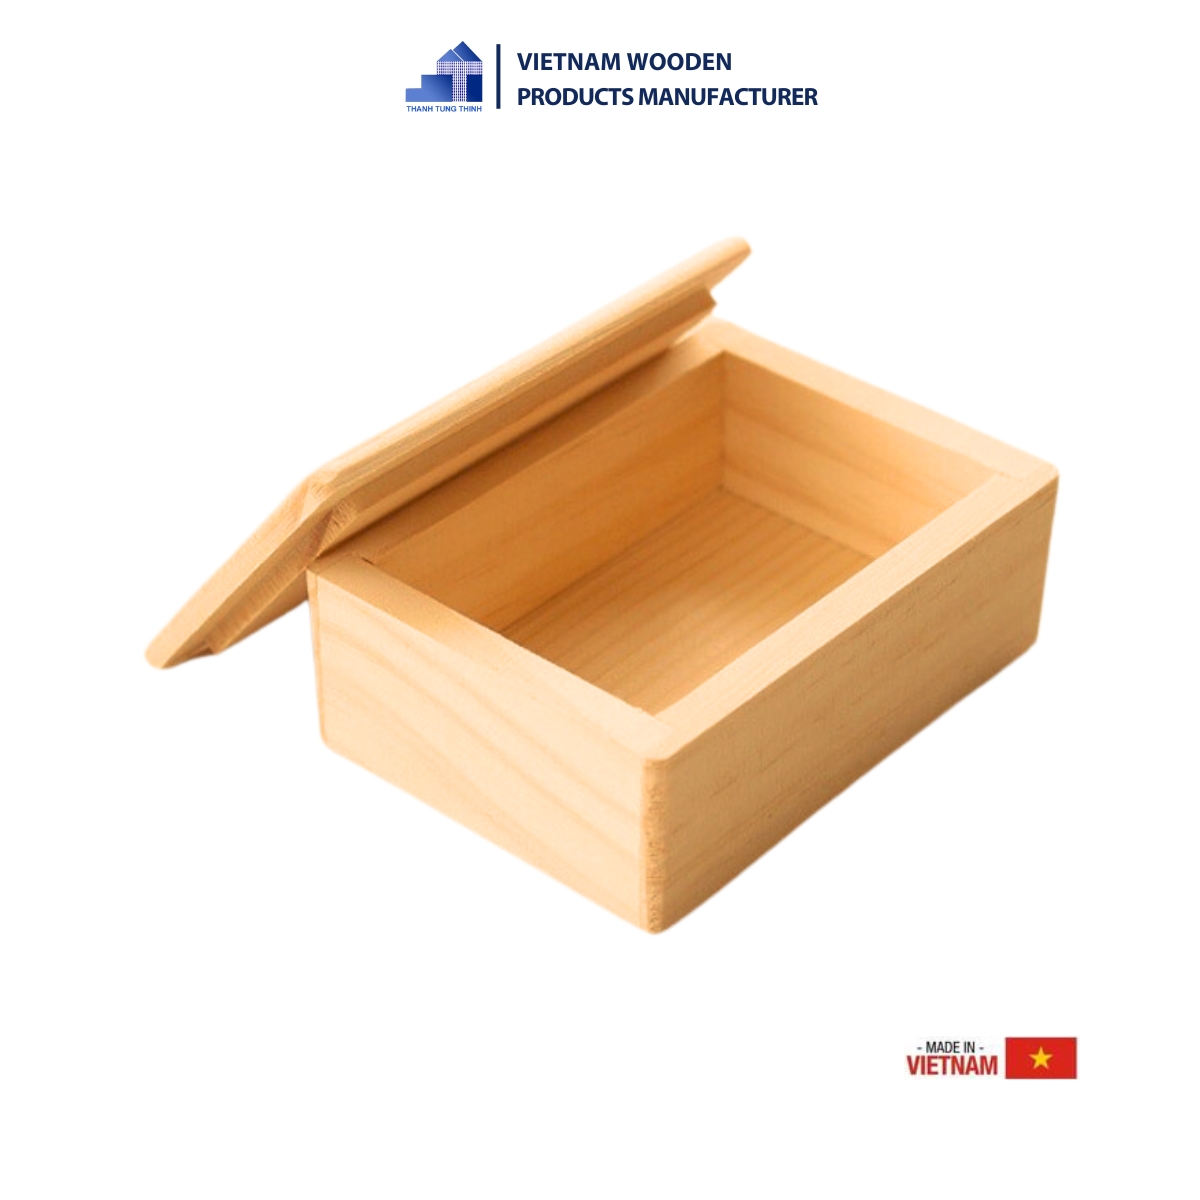 Simple wooden tea box with one compartment.